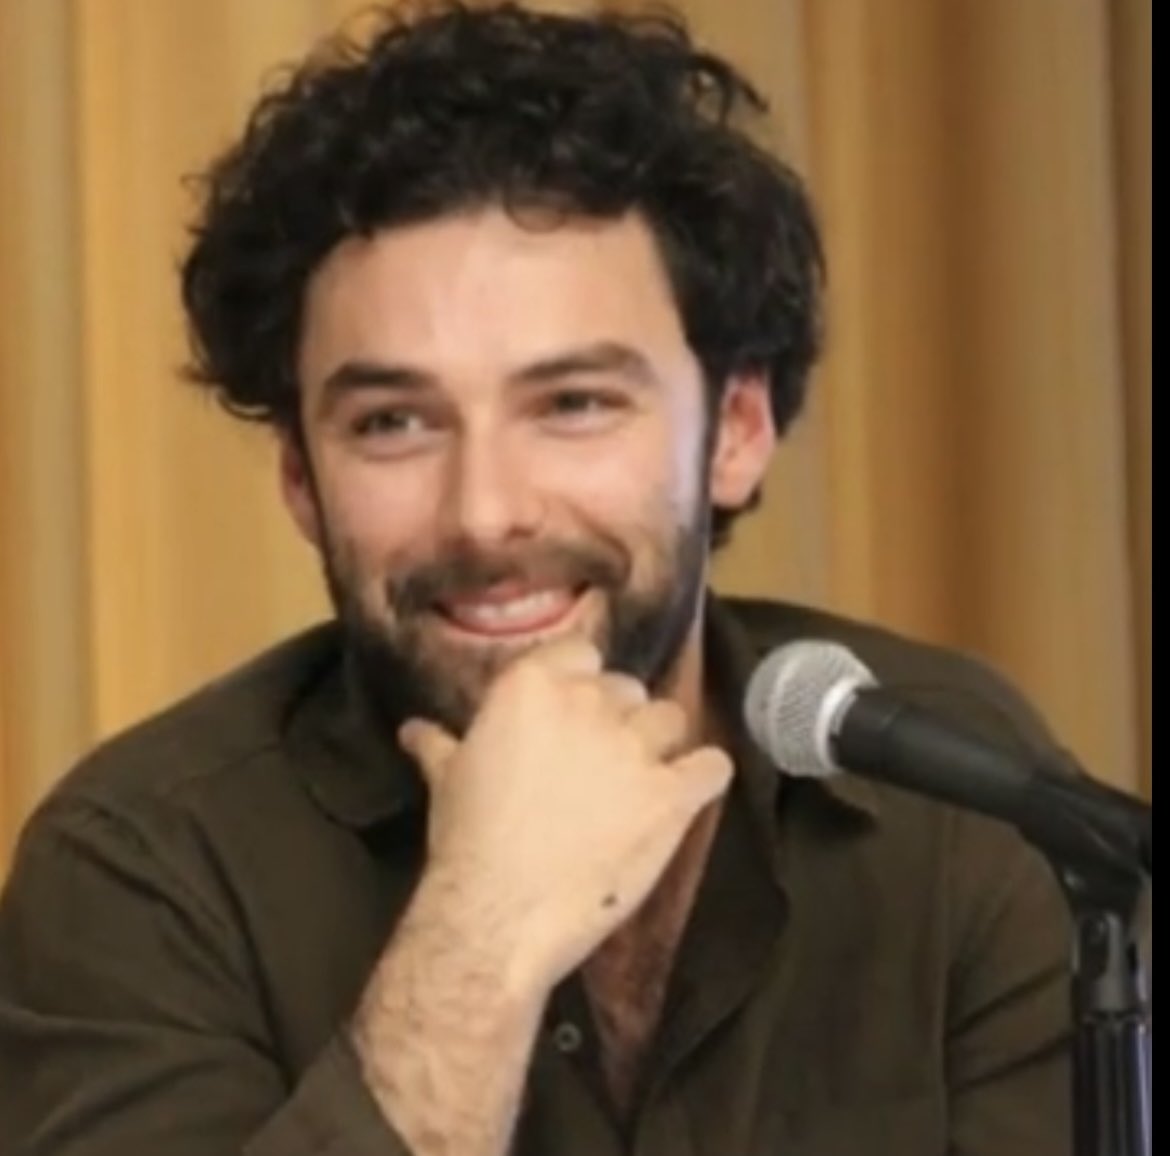 Have a splendid #FurryFriday everyone. Happy start to your weekend. #AidanTurner #AidanCrew (Photo credit to owner)🩵